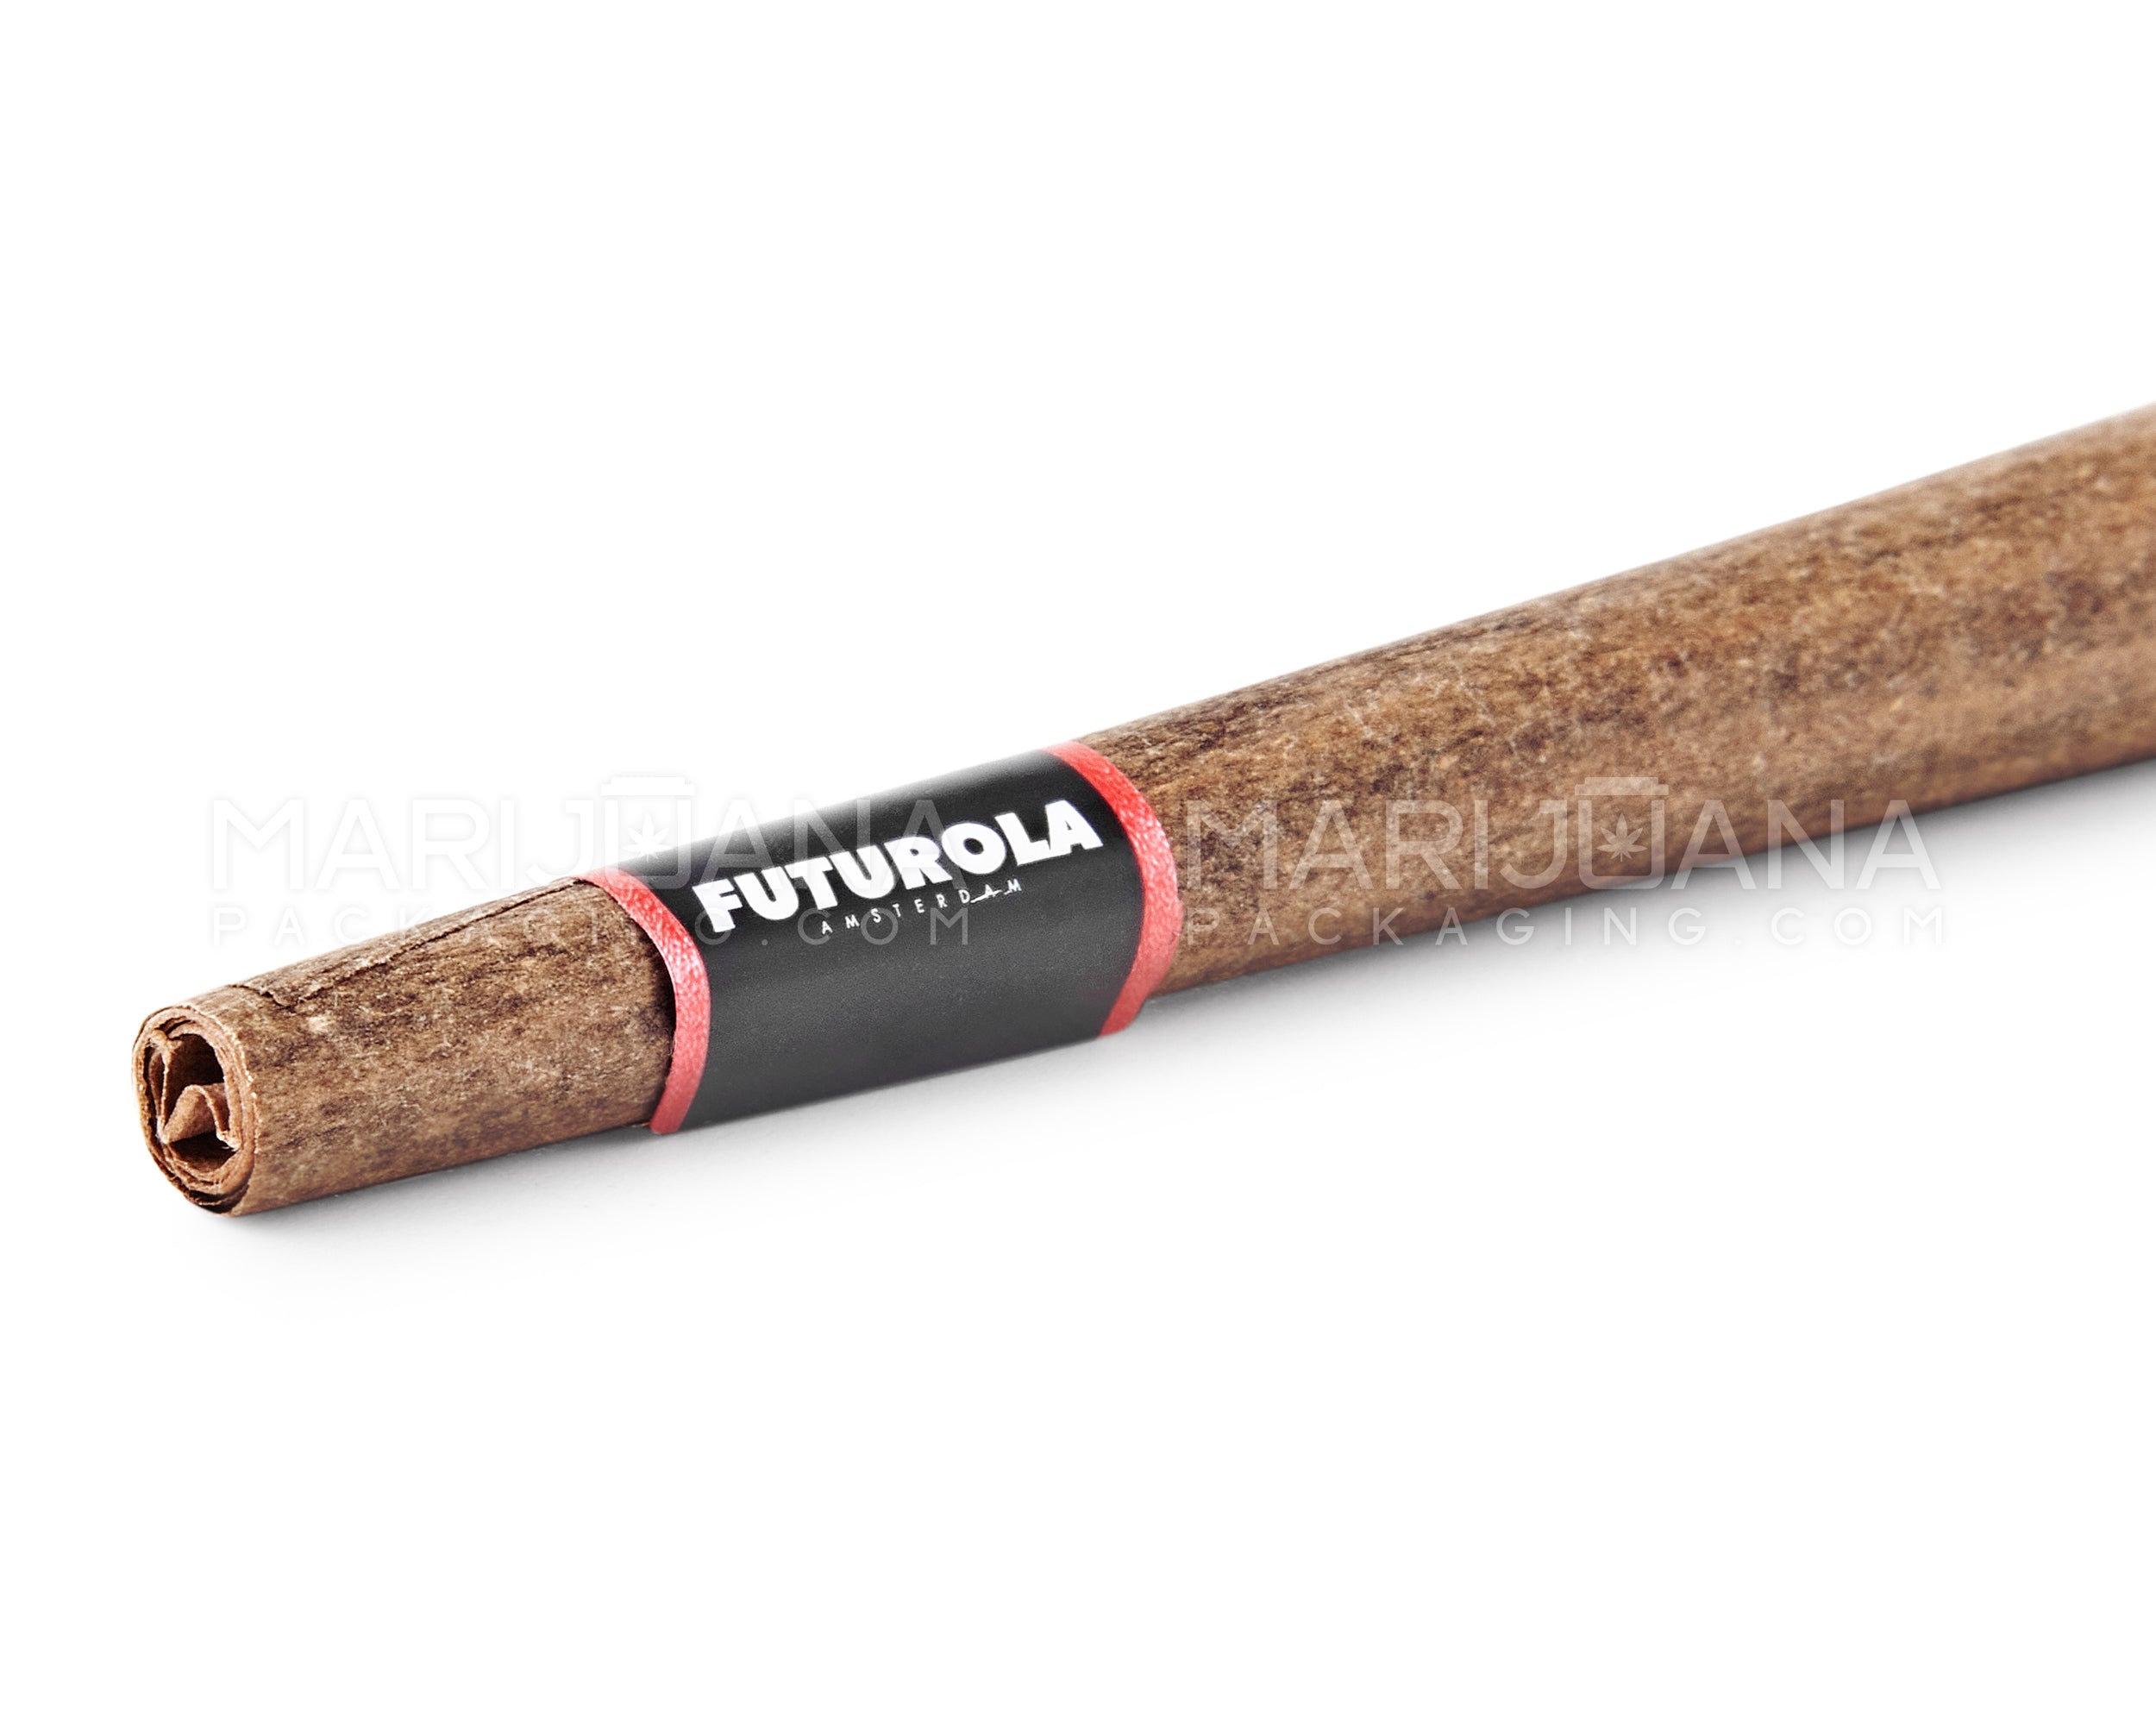 FUTUROLA | 'Retail Display' Tyson Ranch 2.0 "The Toad" King Size Terpene Infused Pre-Rolled Blunt Cones | 109mm - Blunt Paper - 12 Count